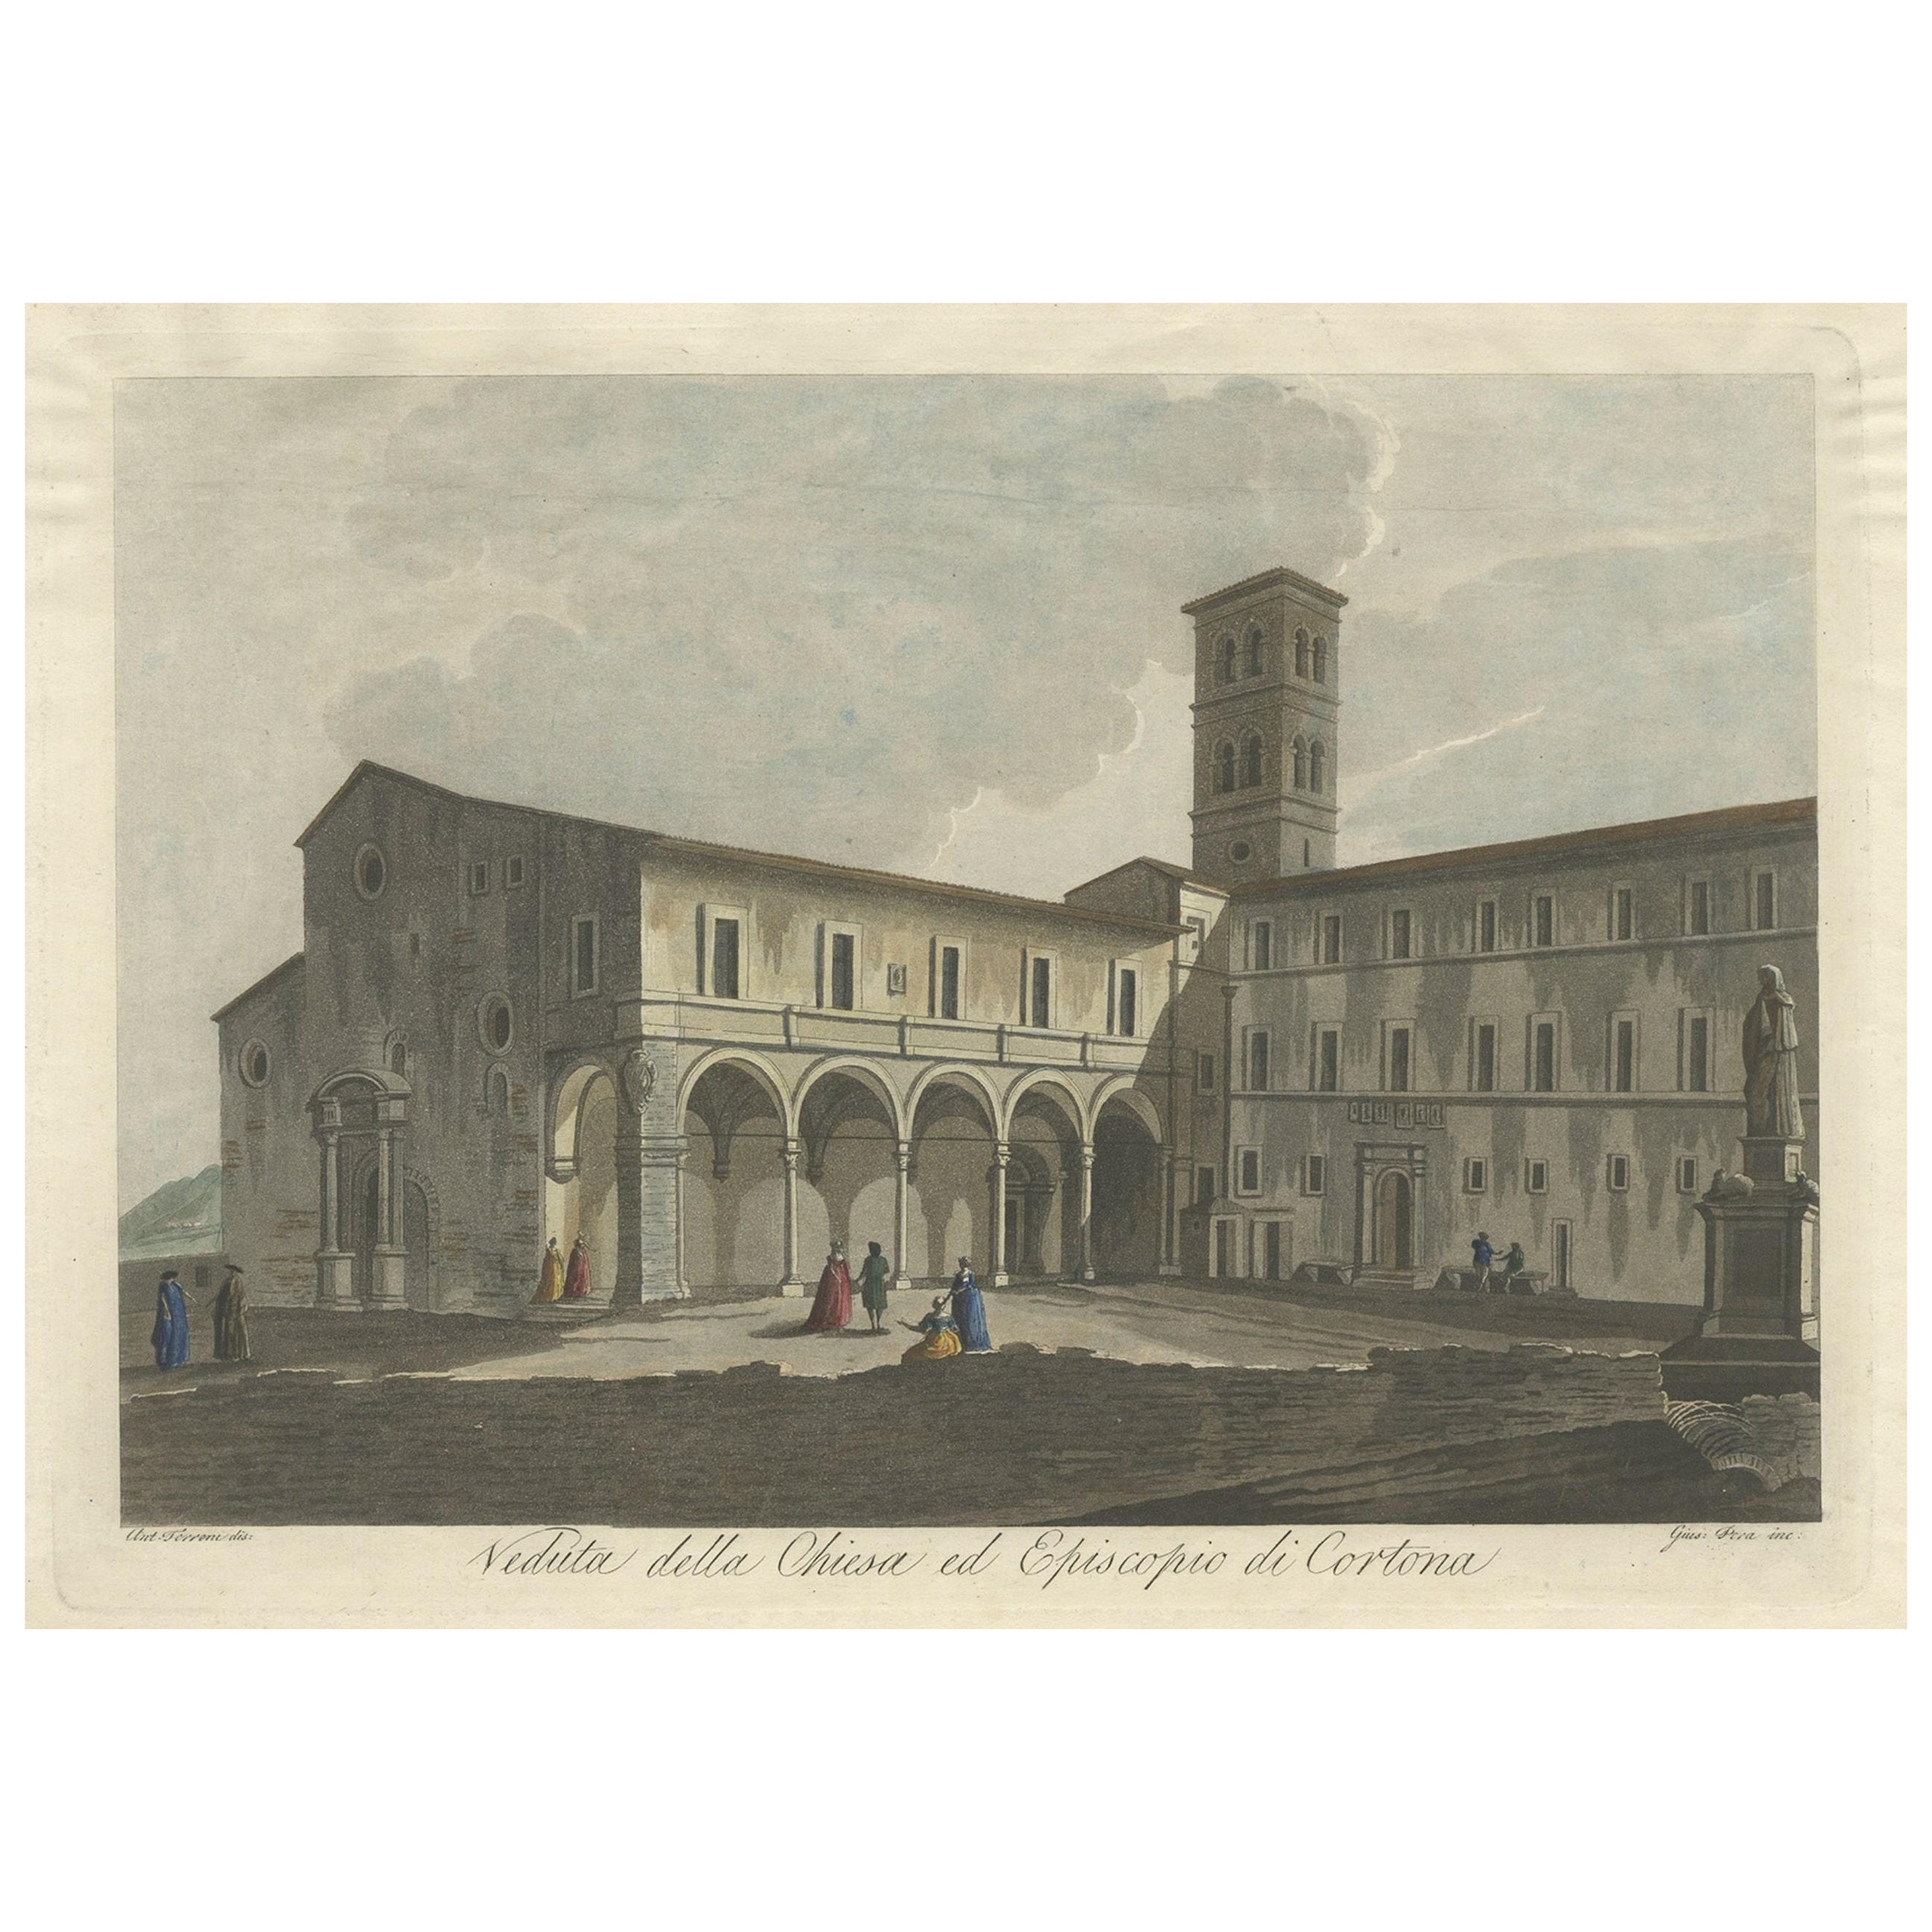 View of the Church of Cortona, a Town and Comune Arezzo, in Tuscany, Italy, 1800